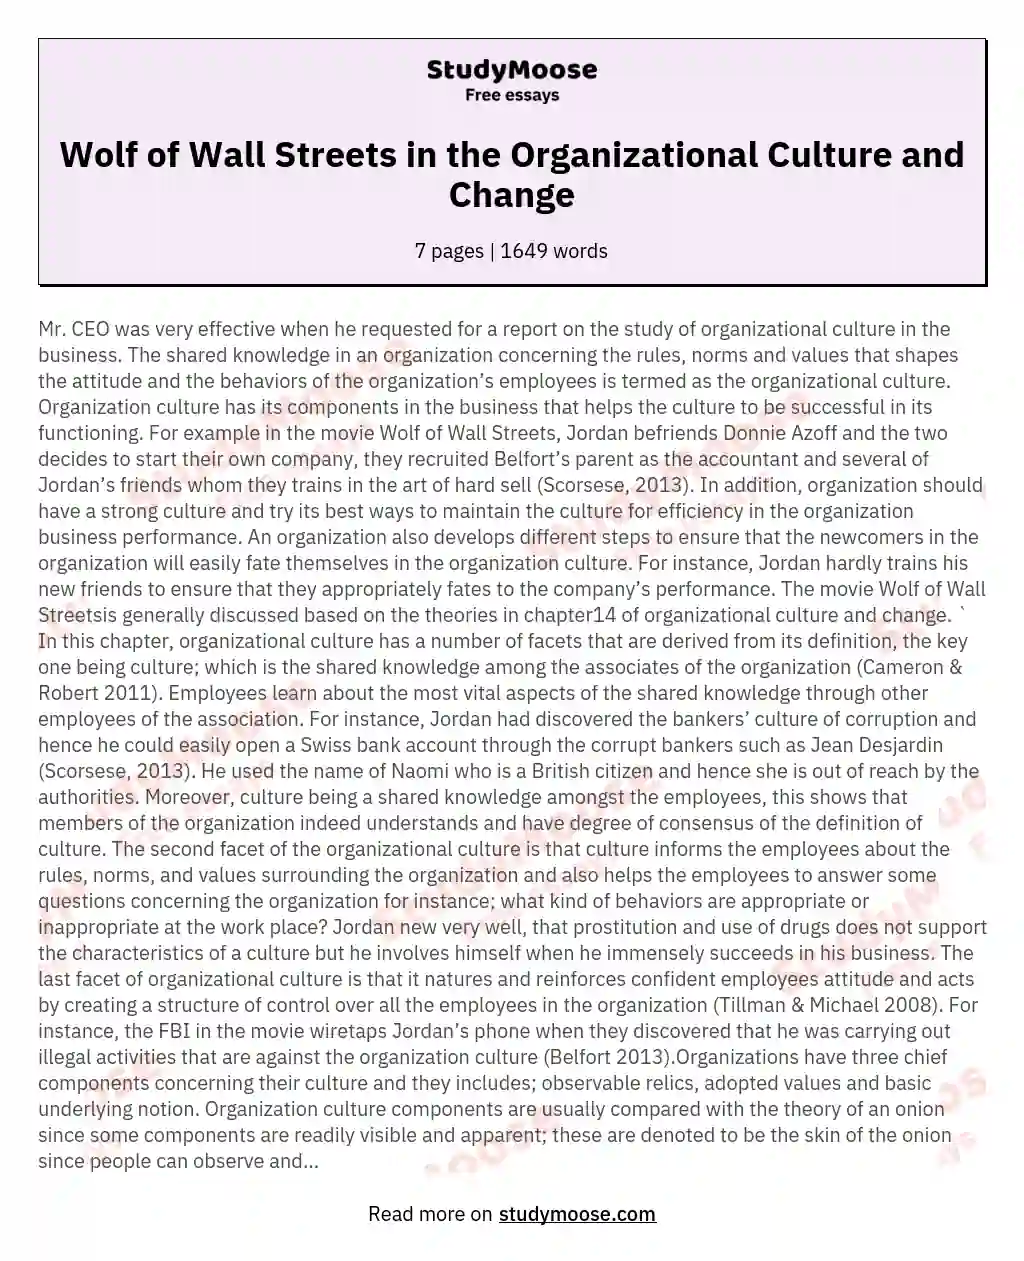 Wolf of Wall Streets in the Organizational Culture and Change